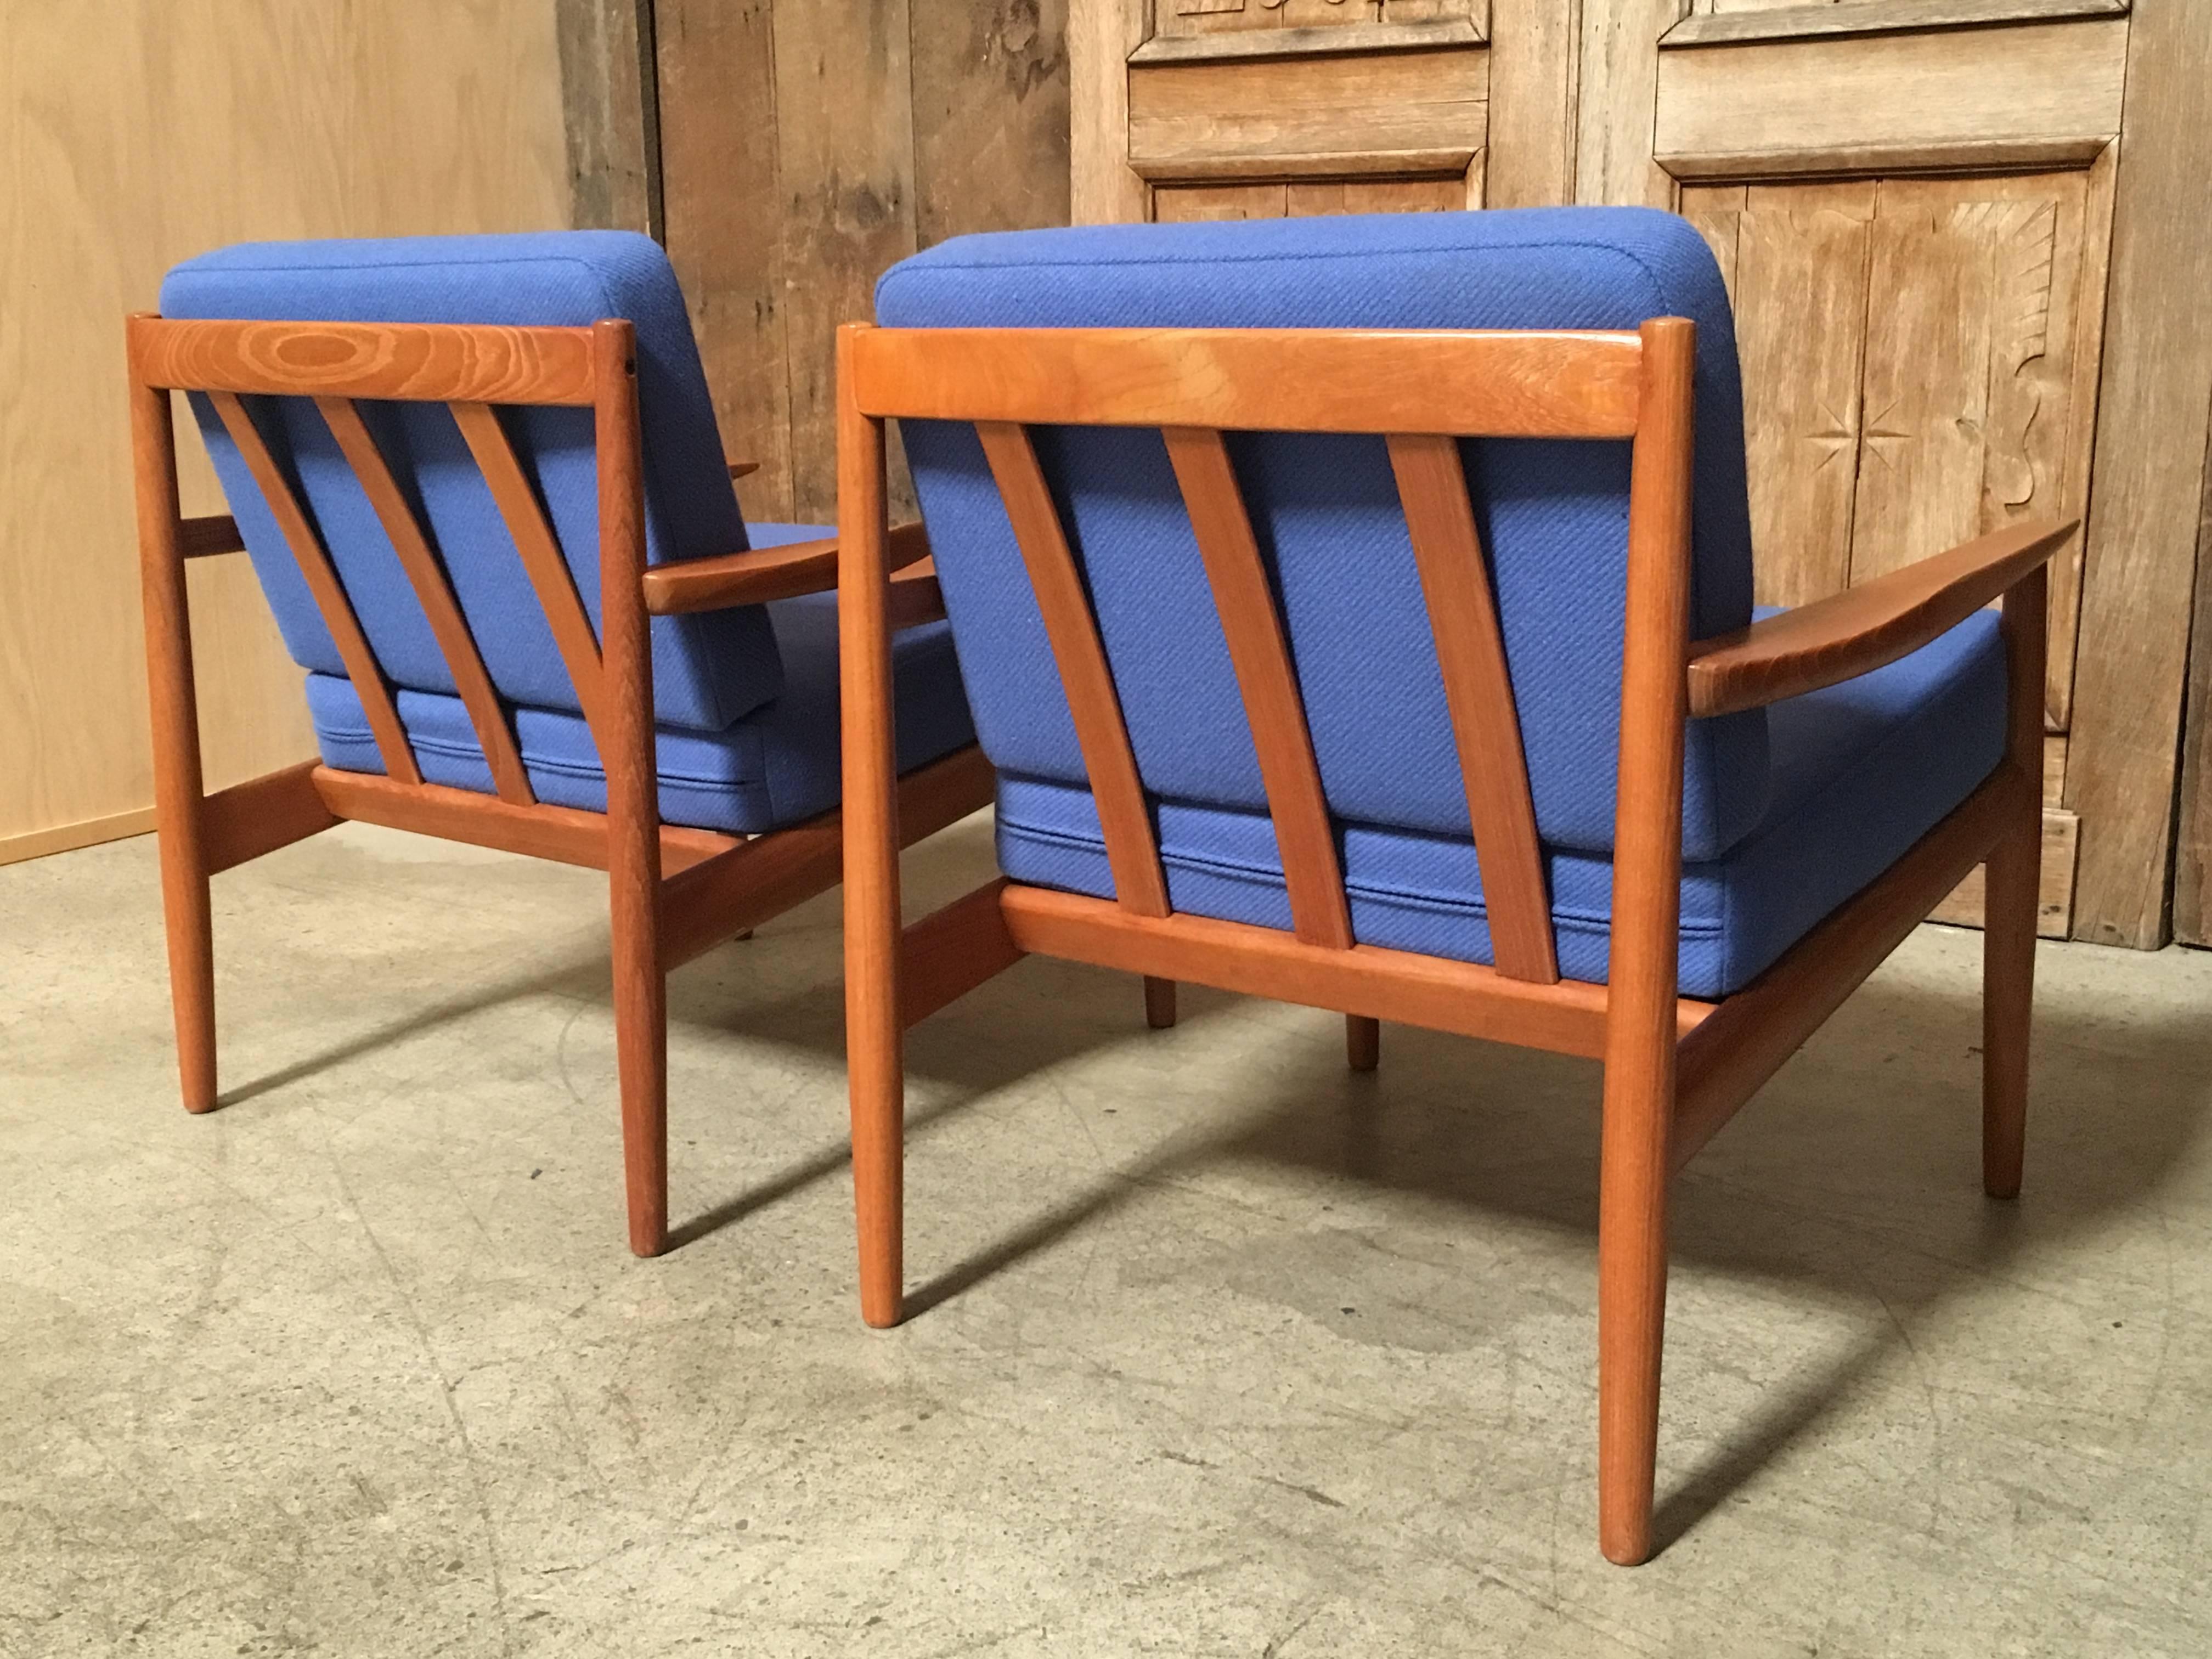 Pair of Danish Modern Lounge Chairs by Arne Vodder 1